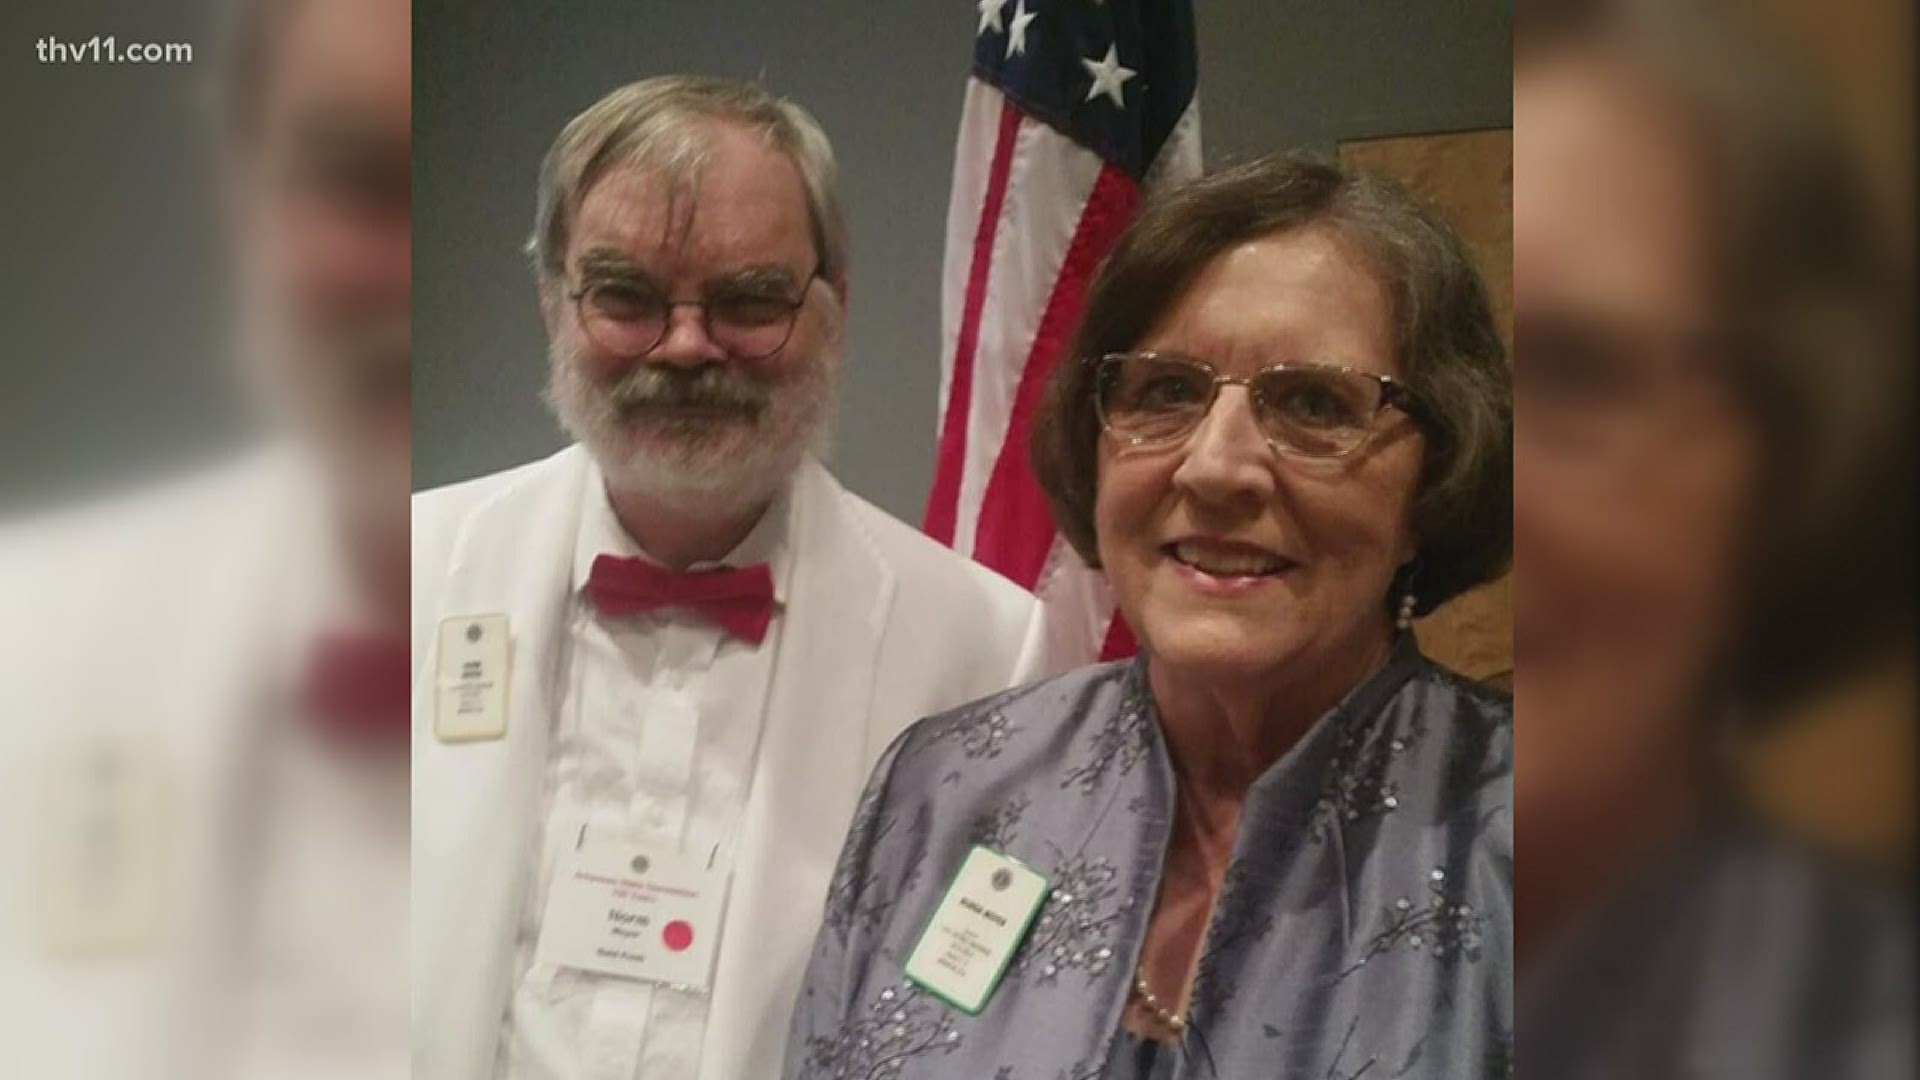 Bonda and Norm Moyer were diagnosed with coronavirus on March 27. Bonda recovered after 3 days in the hospital, but her husband never made it home.